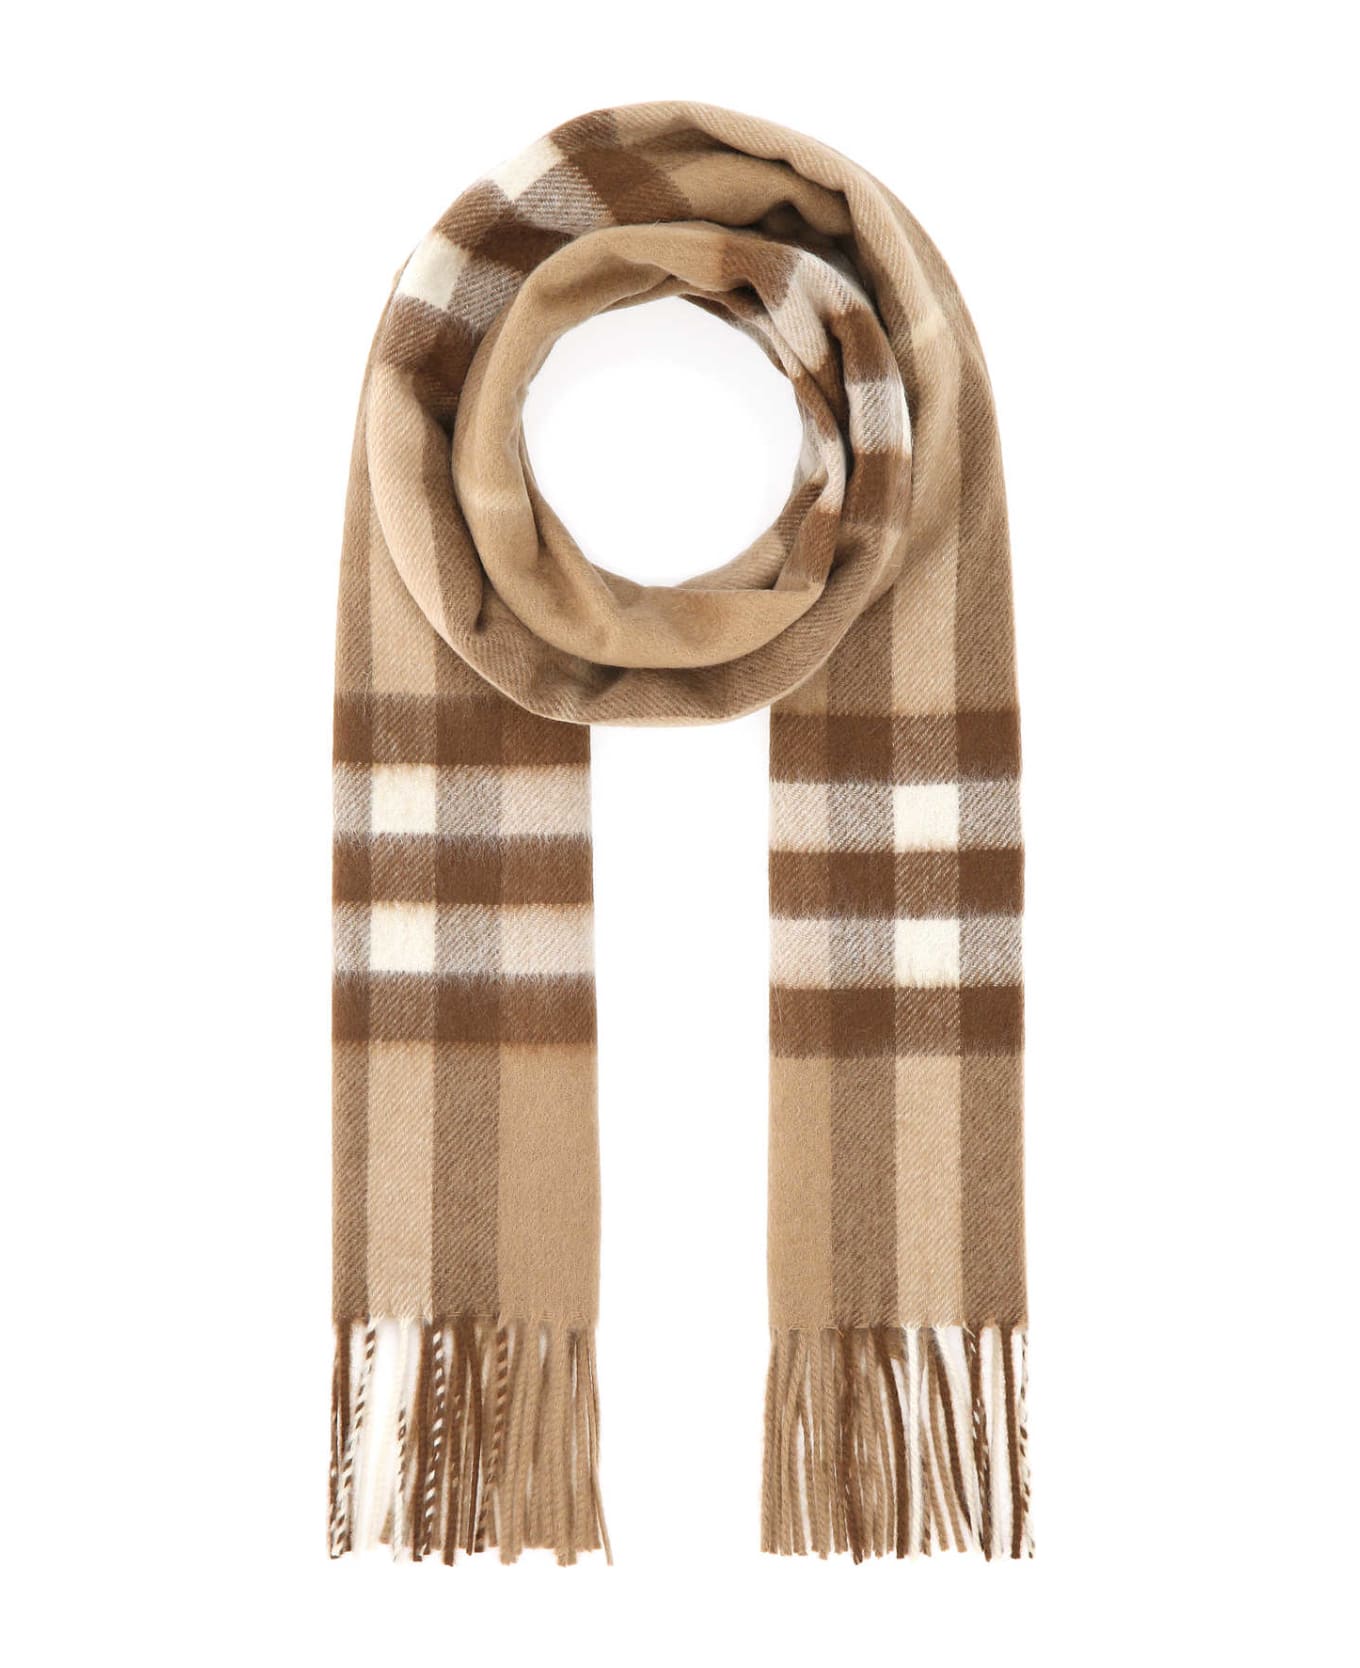 Burberry Embroidered Cashmere Scarf - A1353